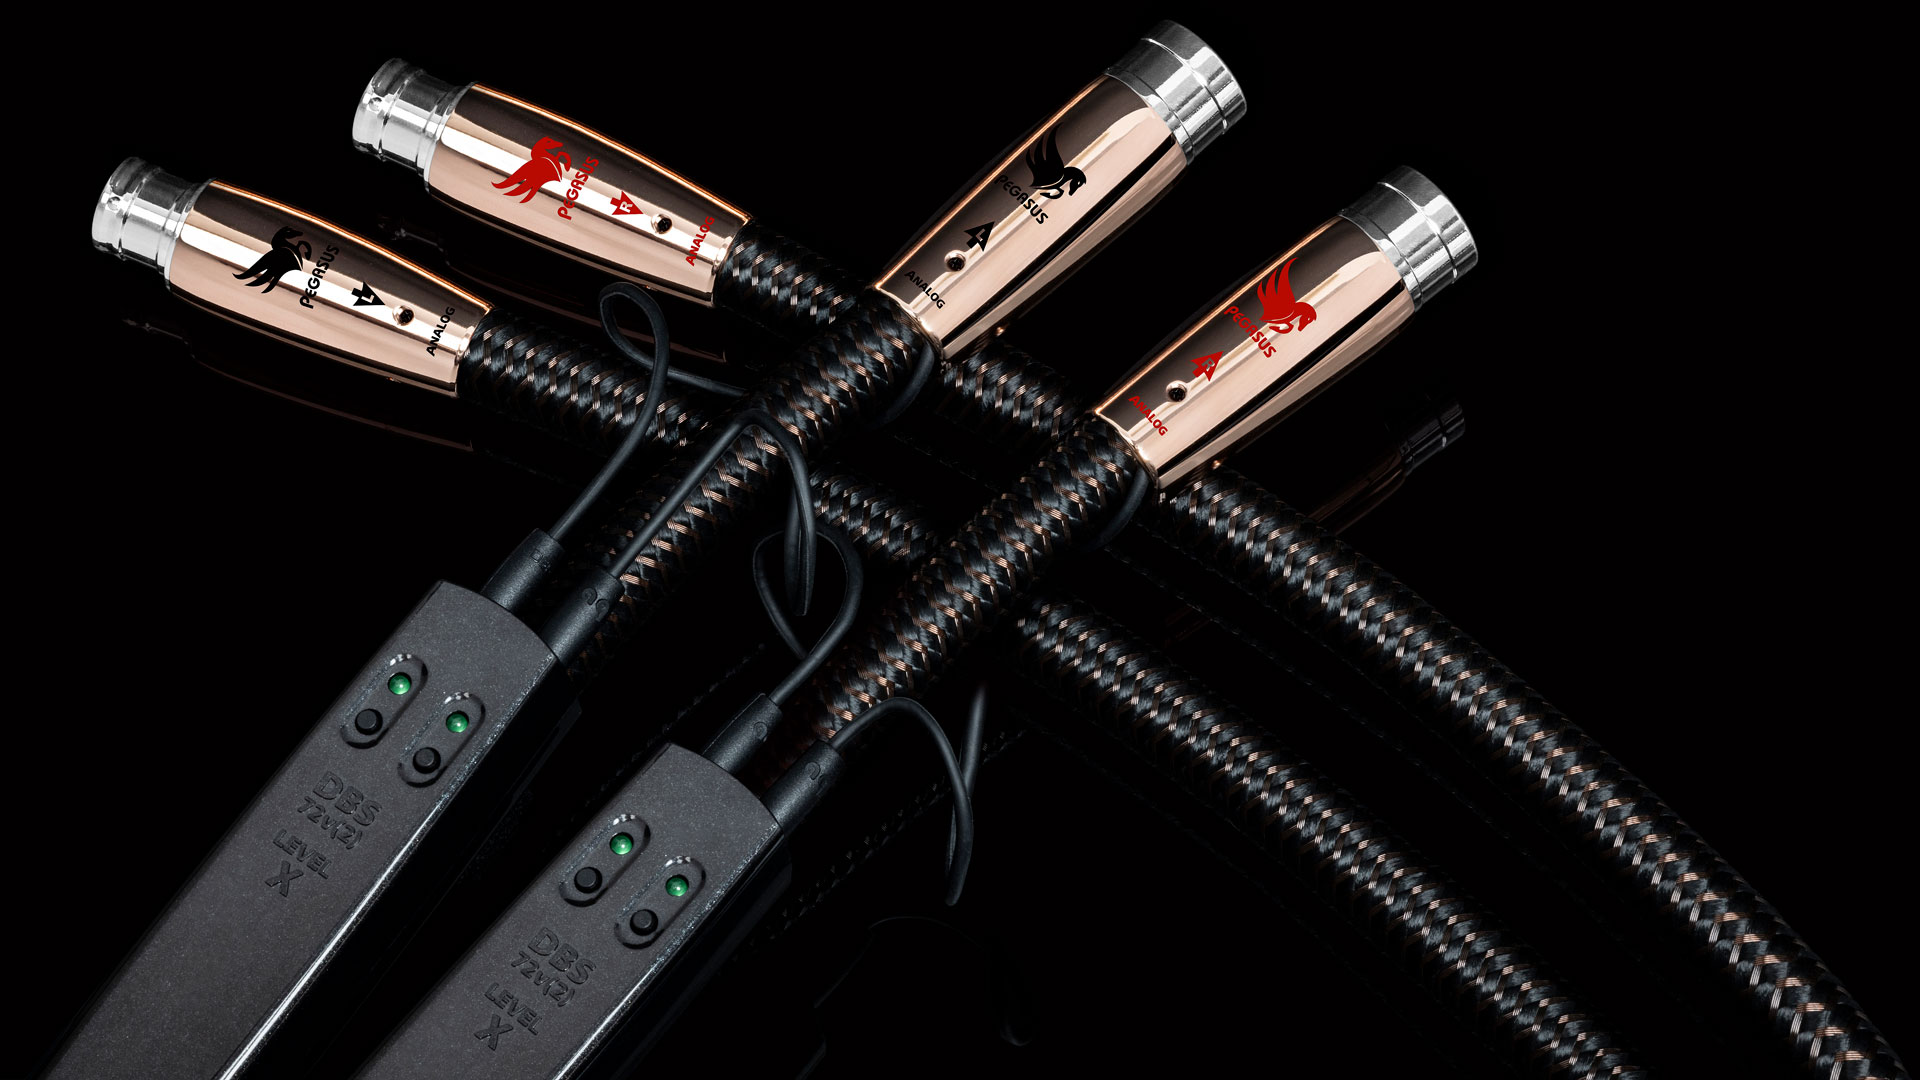 The new Pegasus cables from Audioquest in their XLR version (Image Credit: Audioquest)